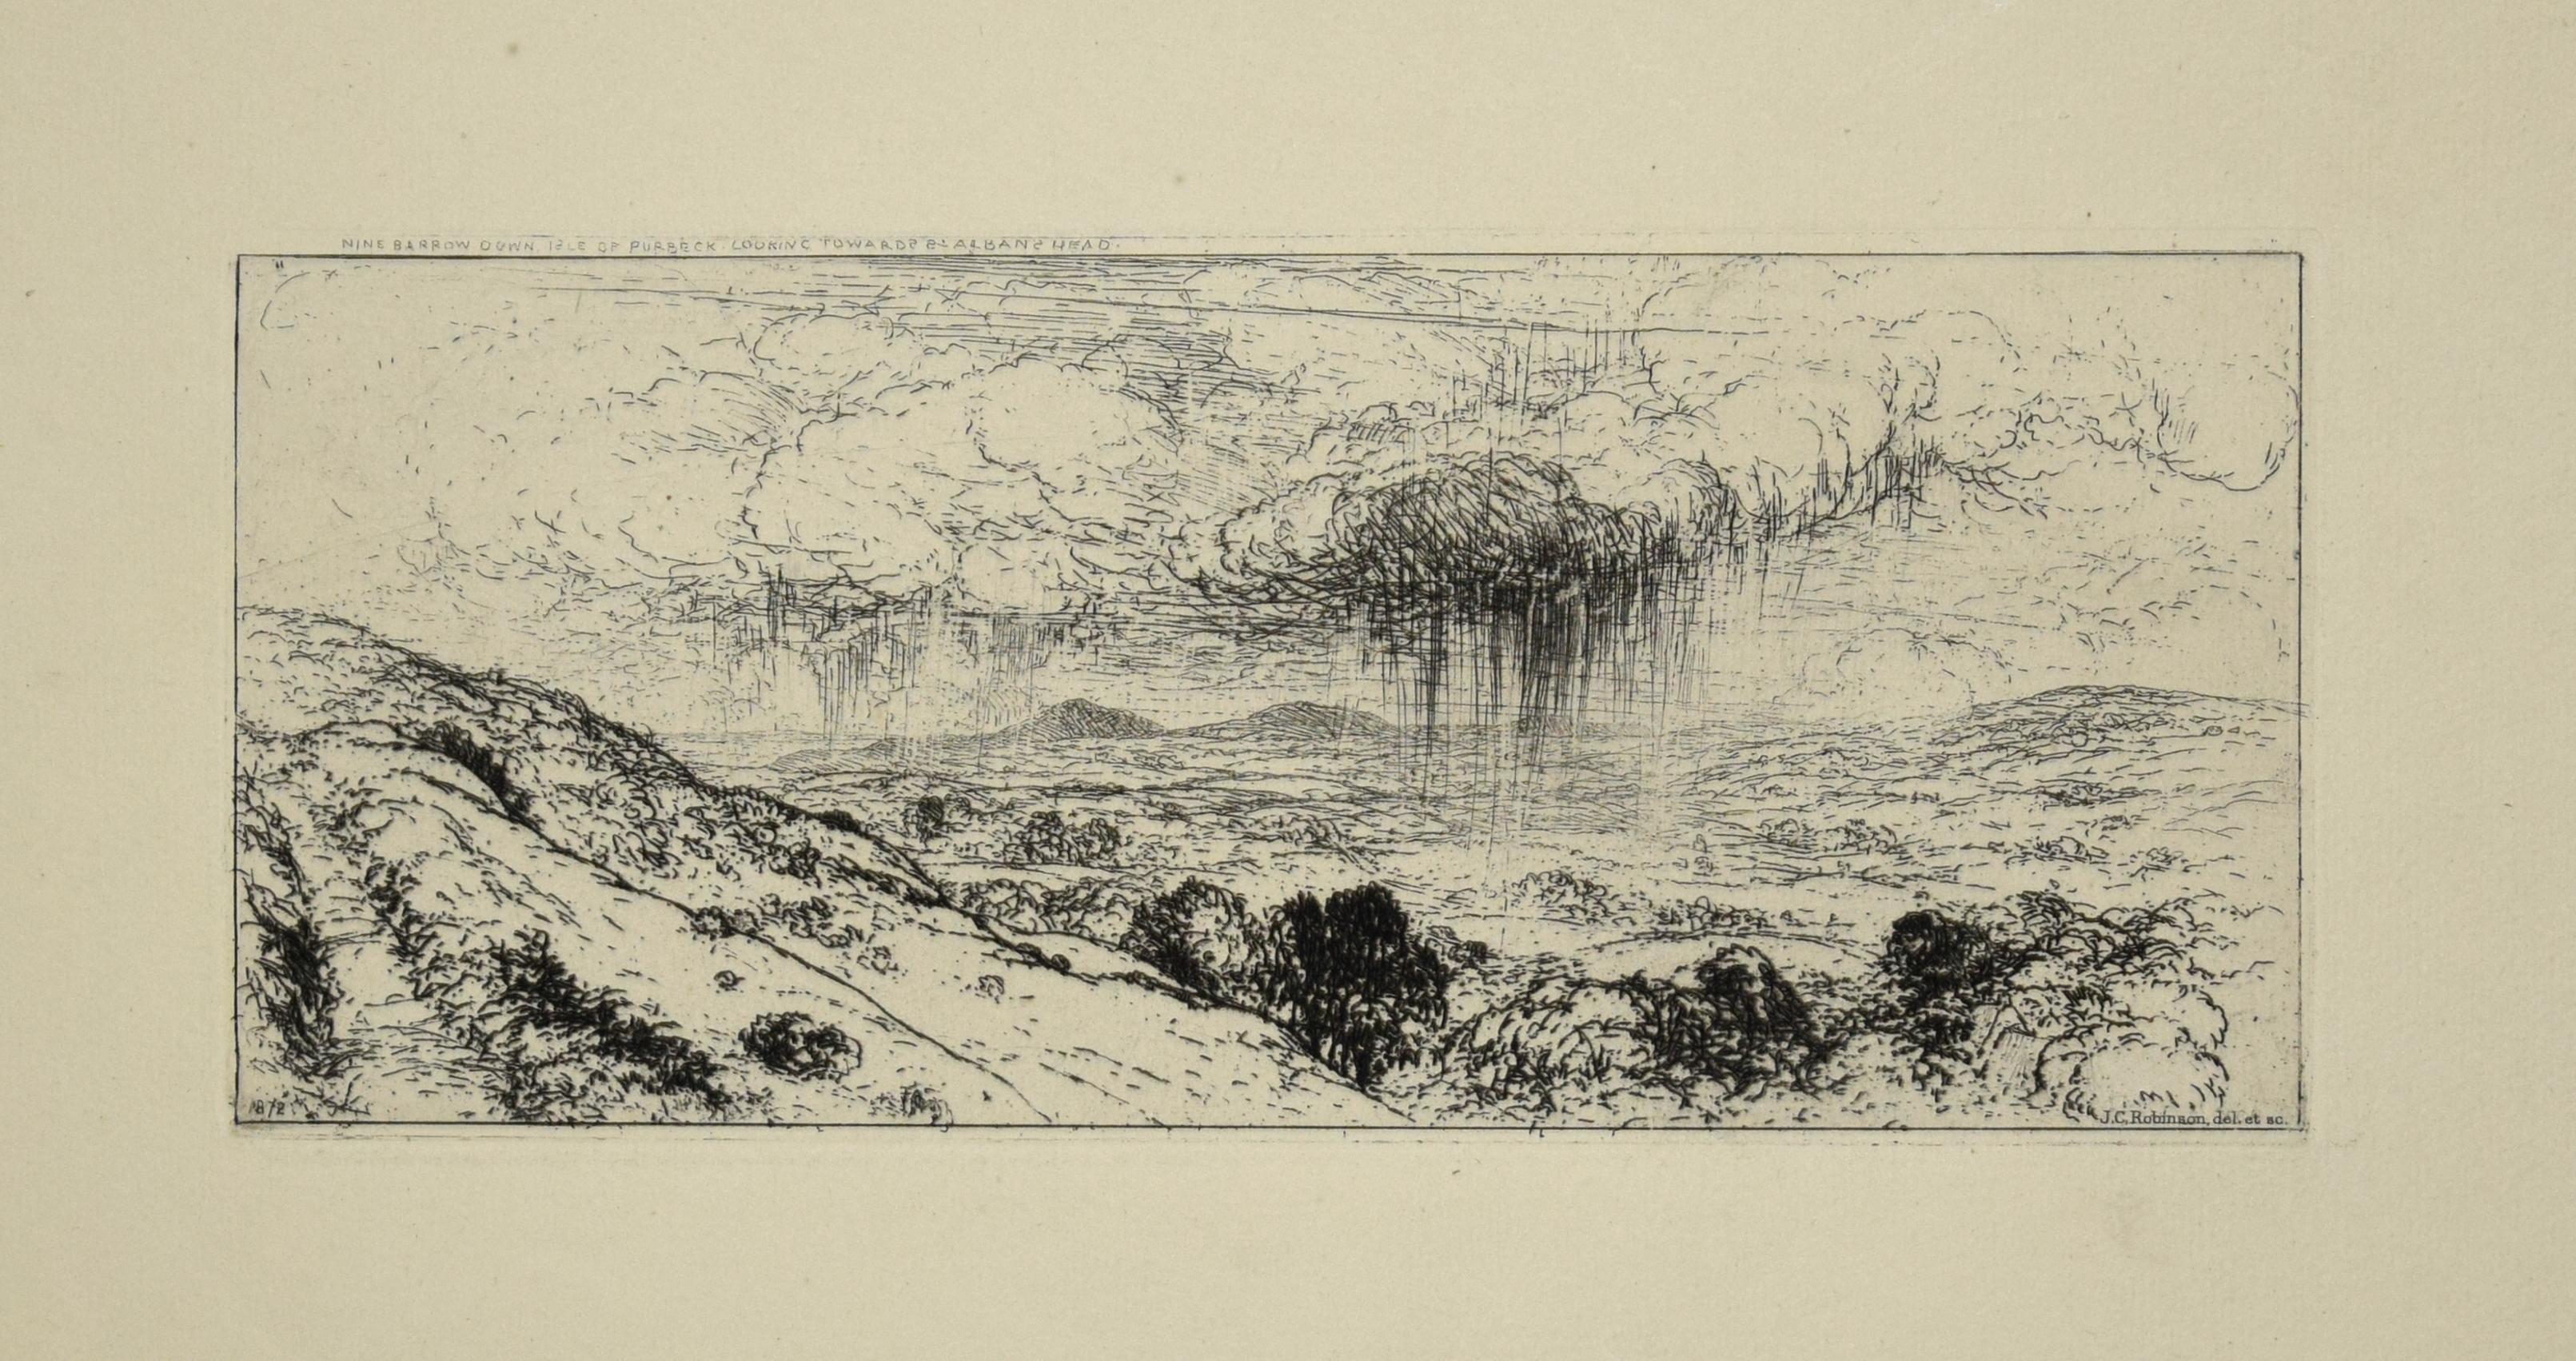 John Charles Robinson Landscape Print - The Storm over the Landscape - Original Etching by J.C. Robinson - 1872